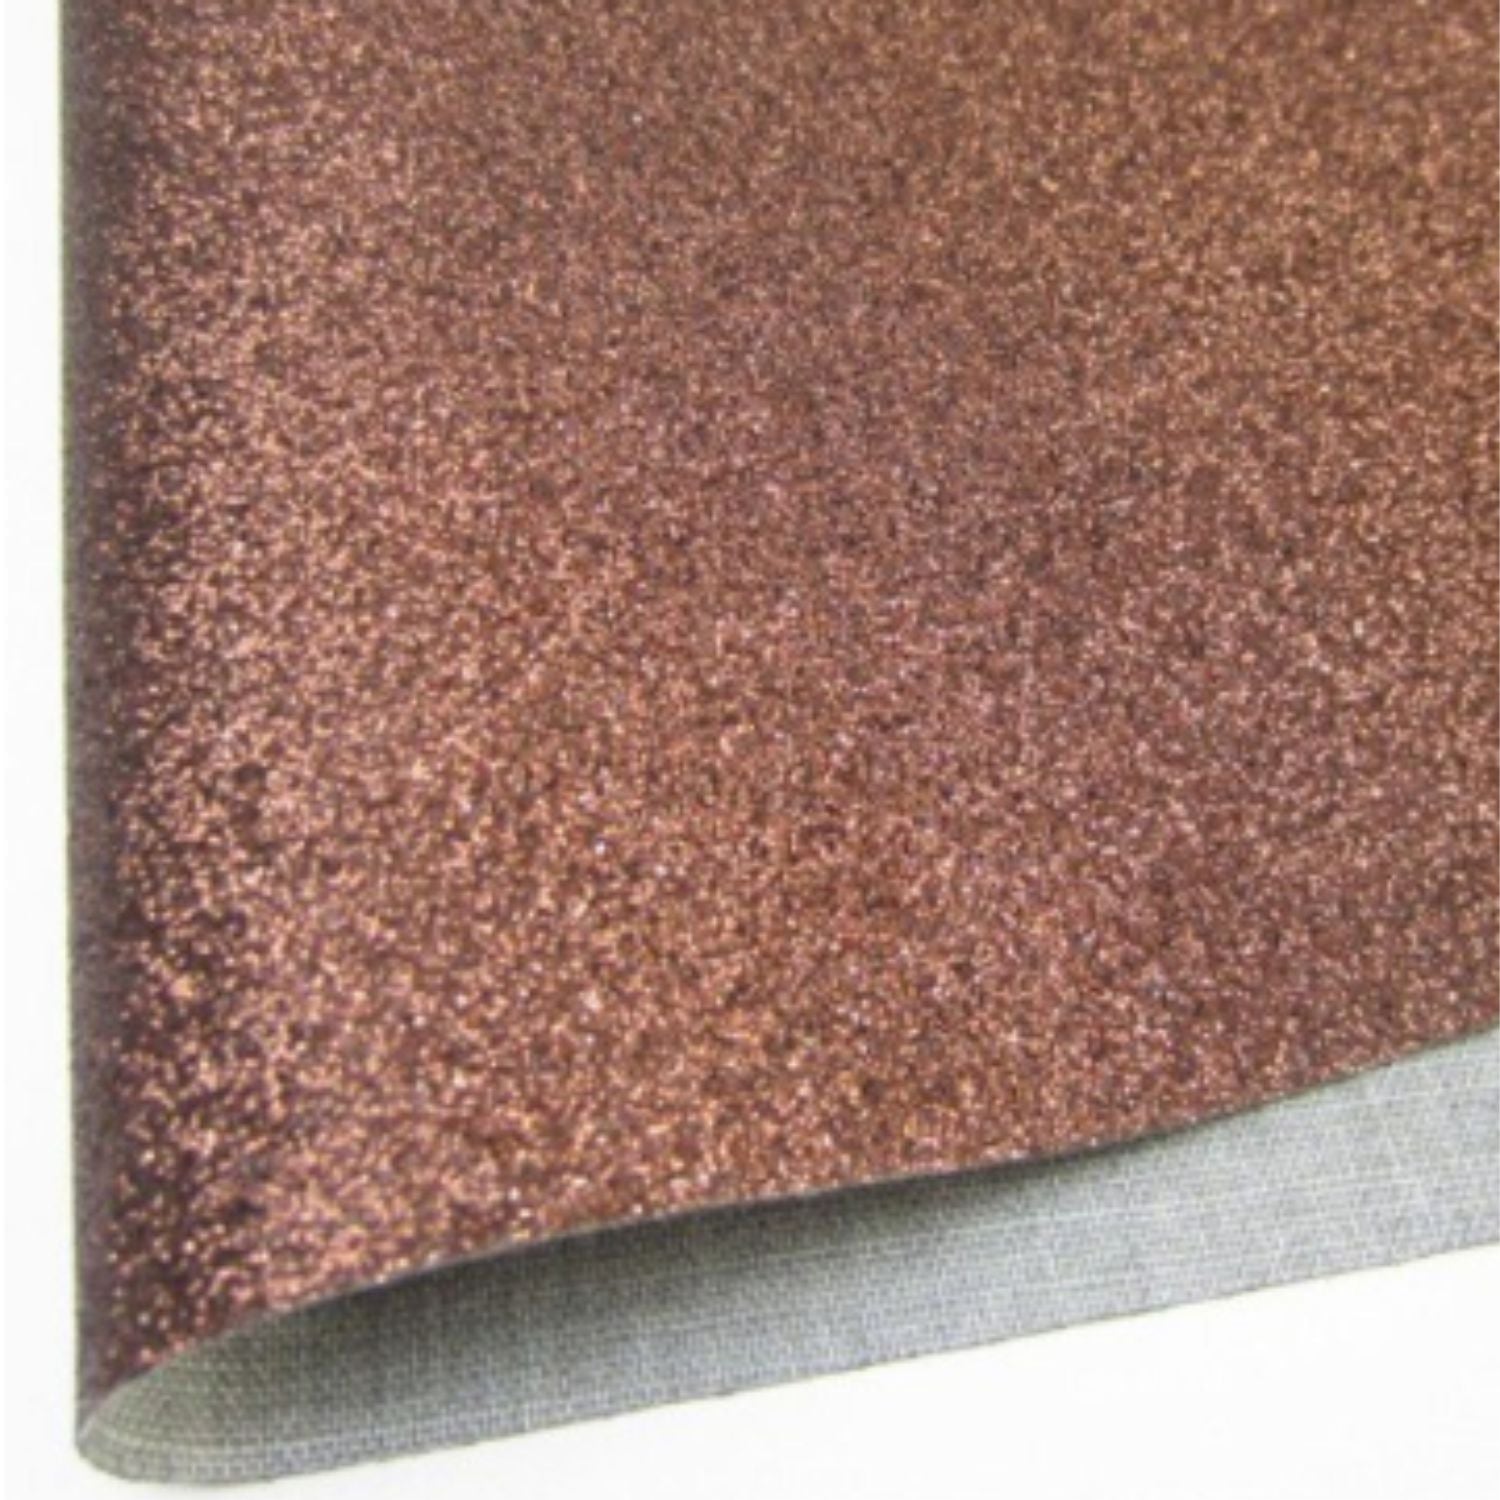 Bronze Fine Glitter Fabric Synthetic Faux PU Leather 11.75in x 12in Sheets - CraftCutterSupply.com